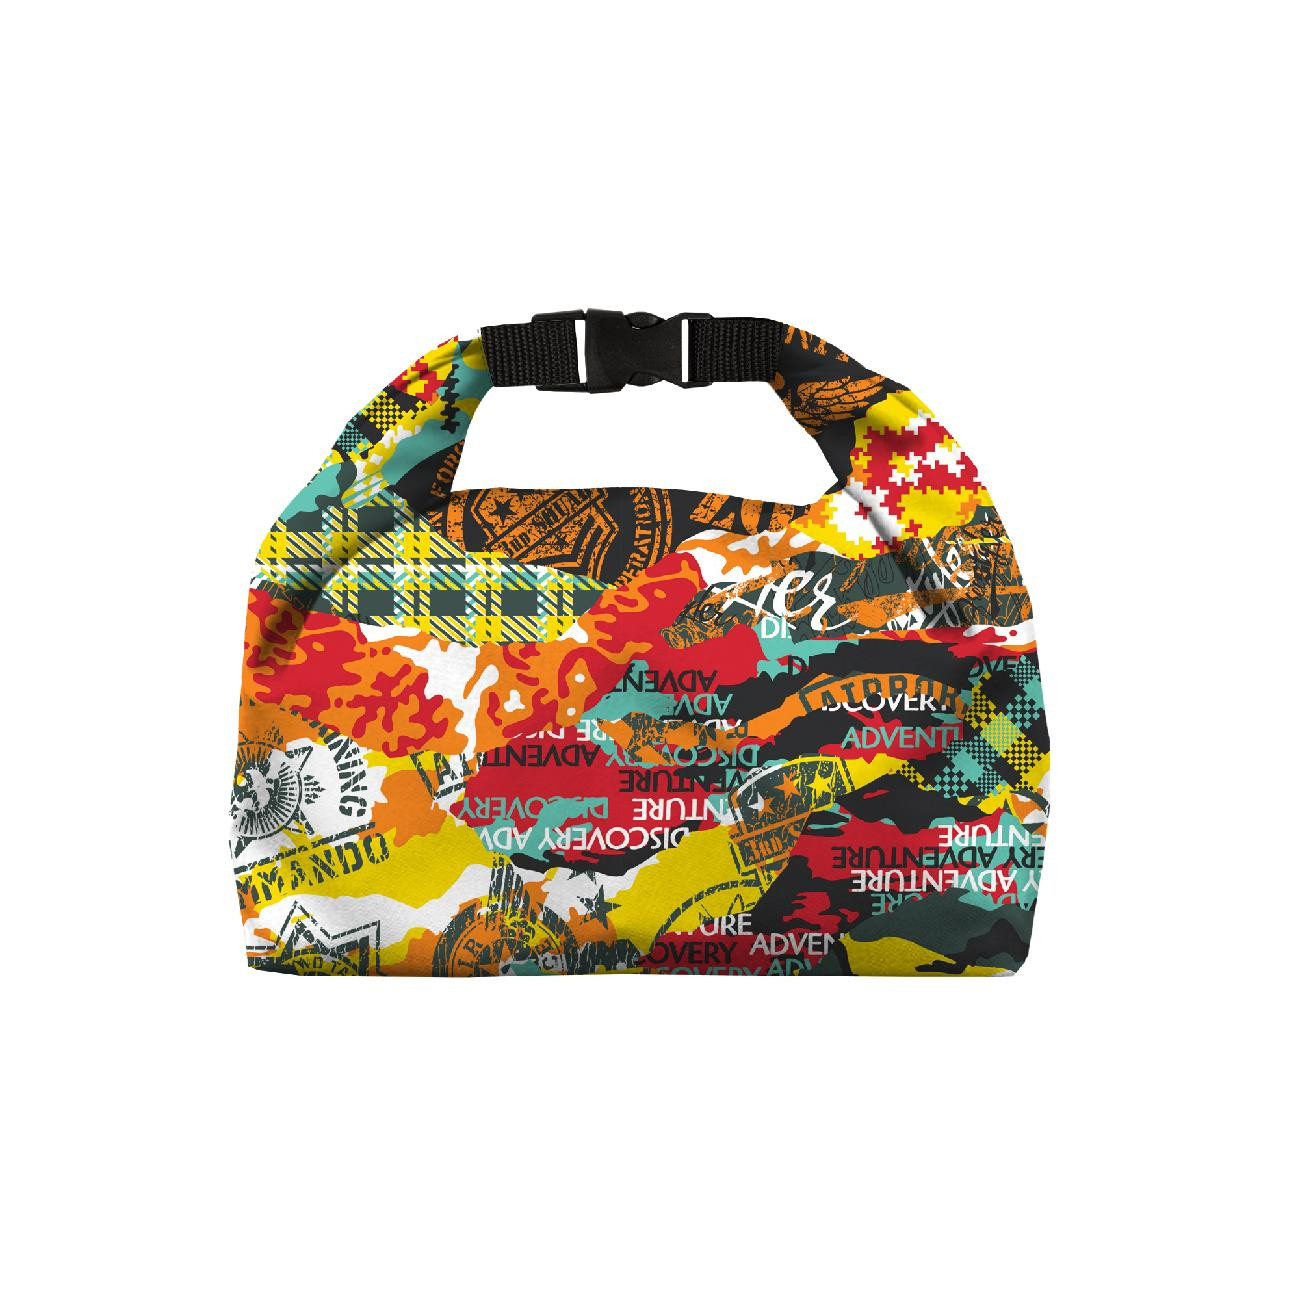 PUPIL PACKAGE - CAMOUFLAGE COLORFUL - sewing set